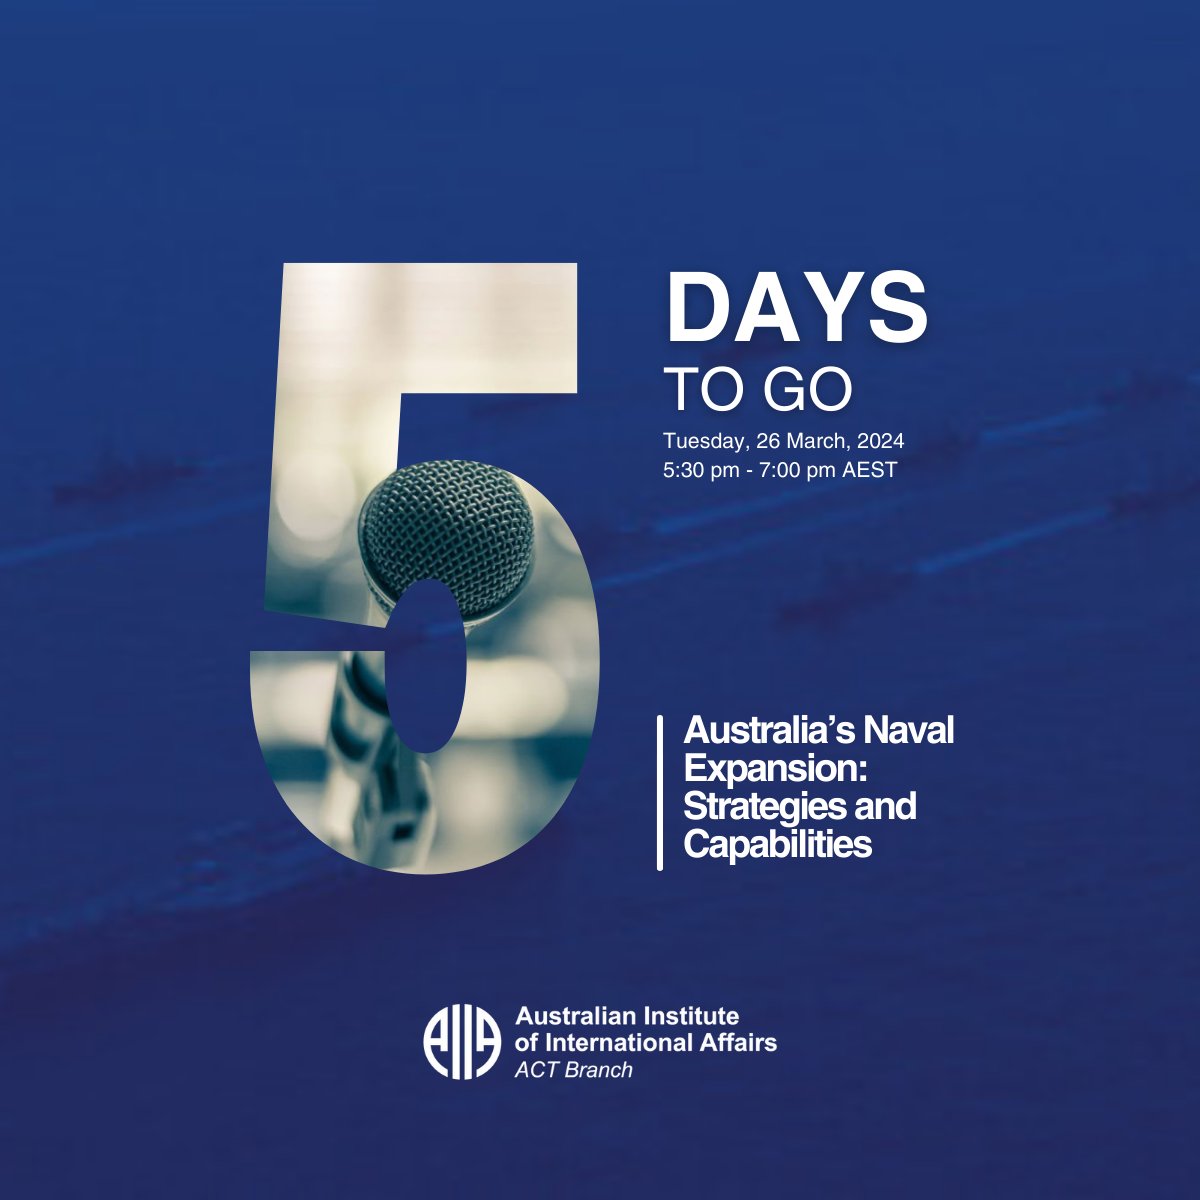 🚨5 DAYS LEFT UNTIL THE EVENT🚨 Register for tickets for our ‘Australia’s Naval Expansion: Strategies and Capabilities’ on the 26th of March! Don’t miss out on the presentation by Jennifer Parker. Register now ✅ ow.ly/3hoK50QVfig